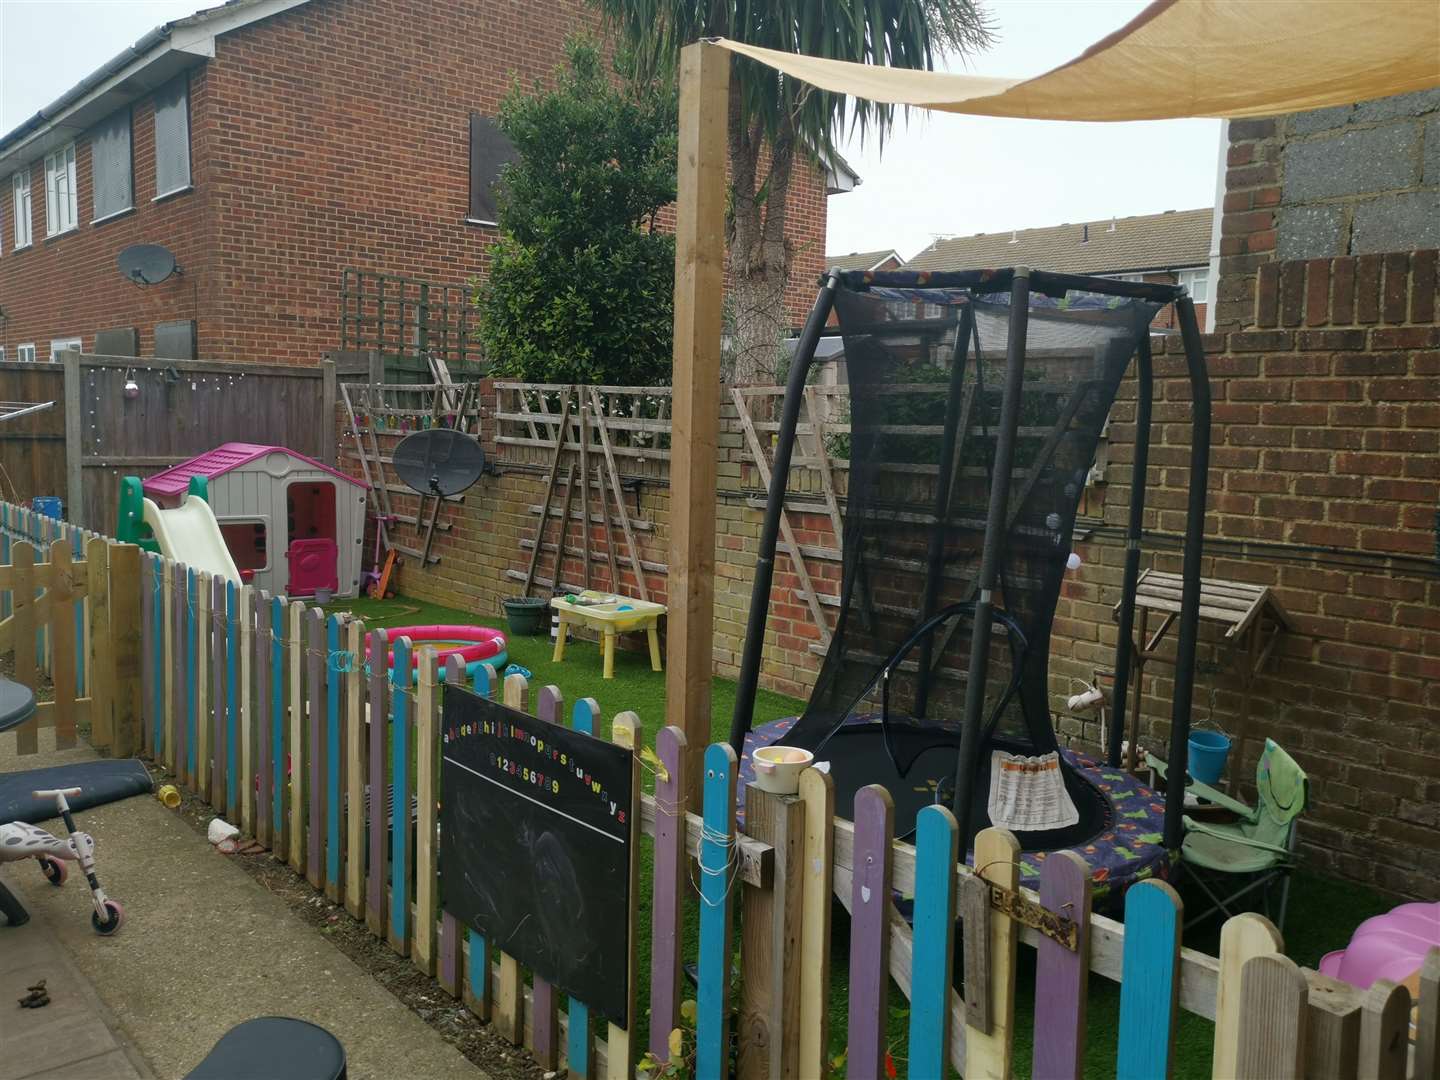 The garden has been transformed into a place for children to play